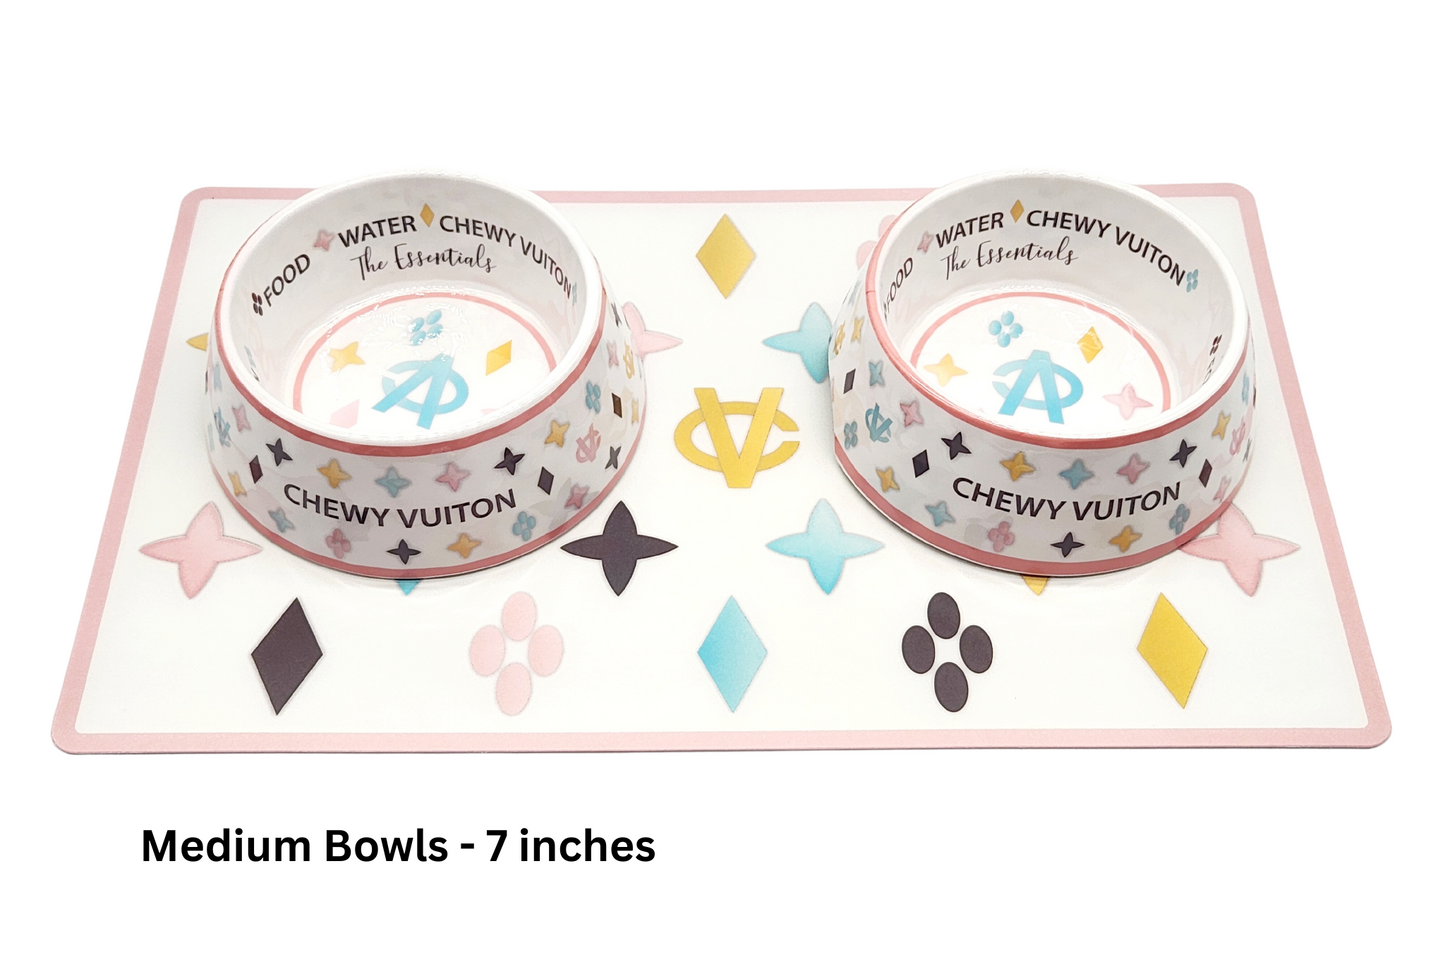 White Chewy Vuiton Dog Bowl Set with Placemat